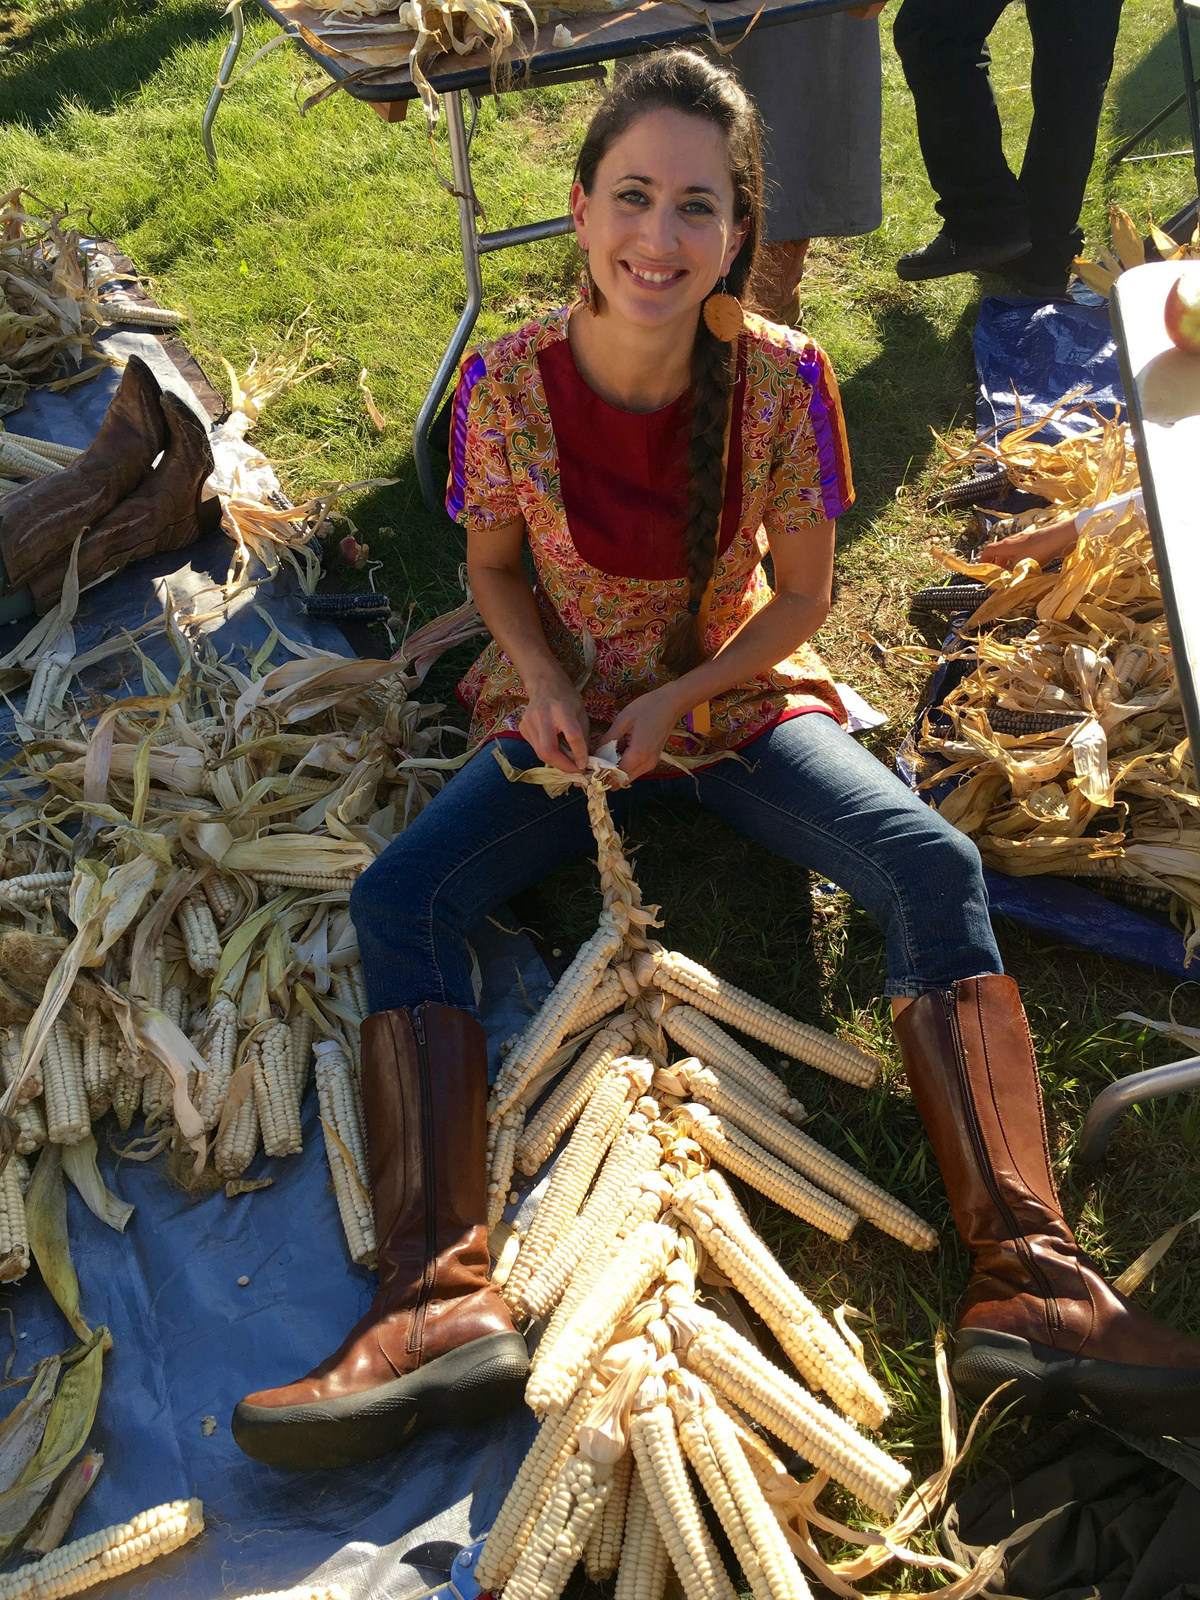 A Mohawk/Mi'kmaq woman with dark plaited hair sits on grass surrounded by corn husks, hand-braiding harvested corn